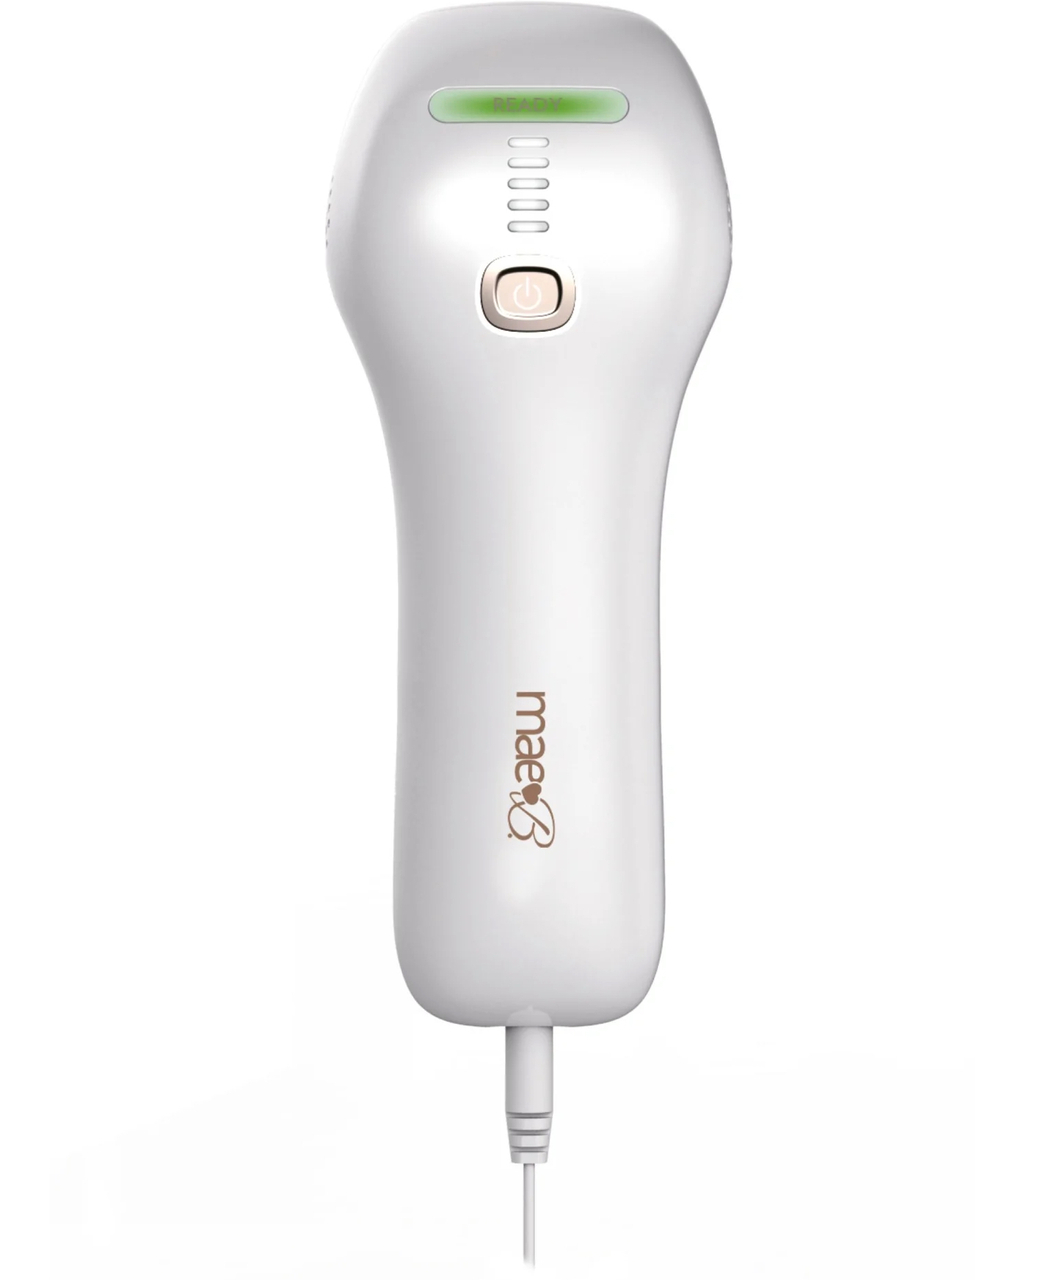 Intimate Health IPL hair removal device